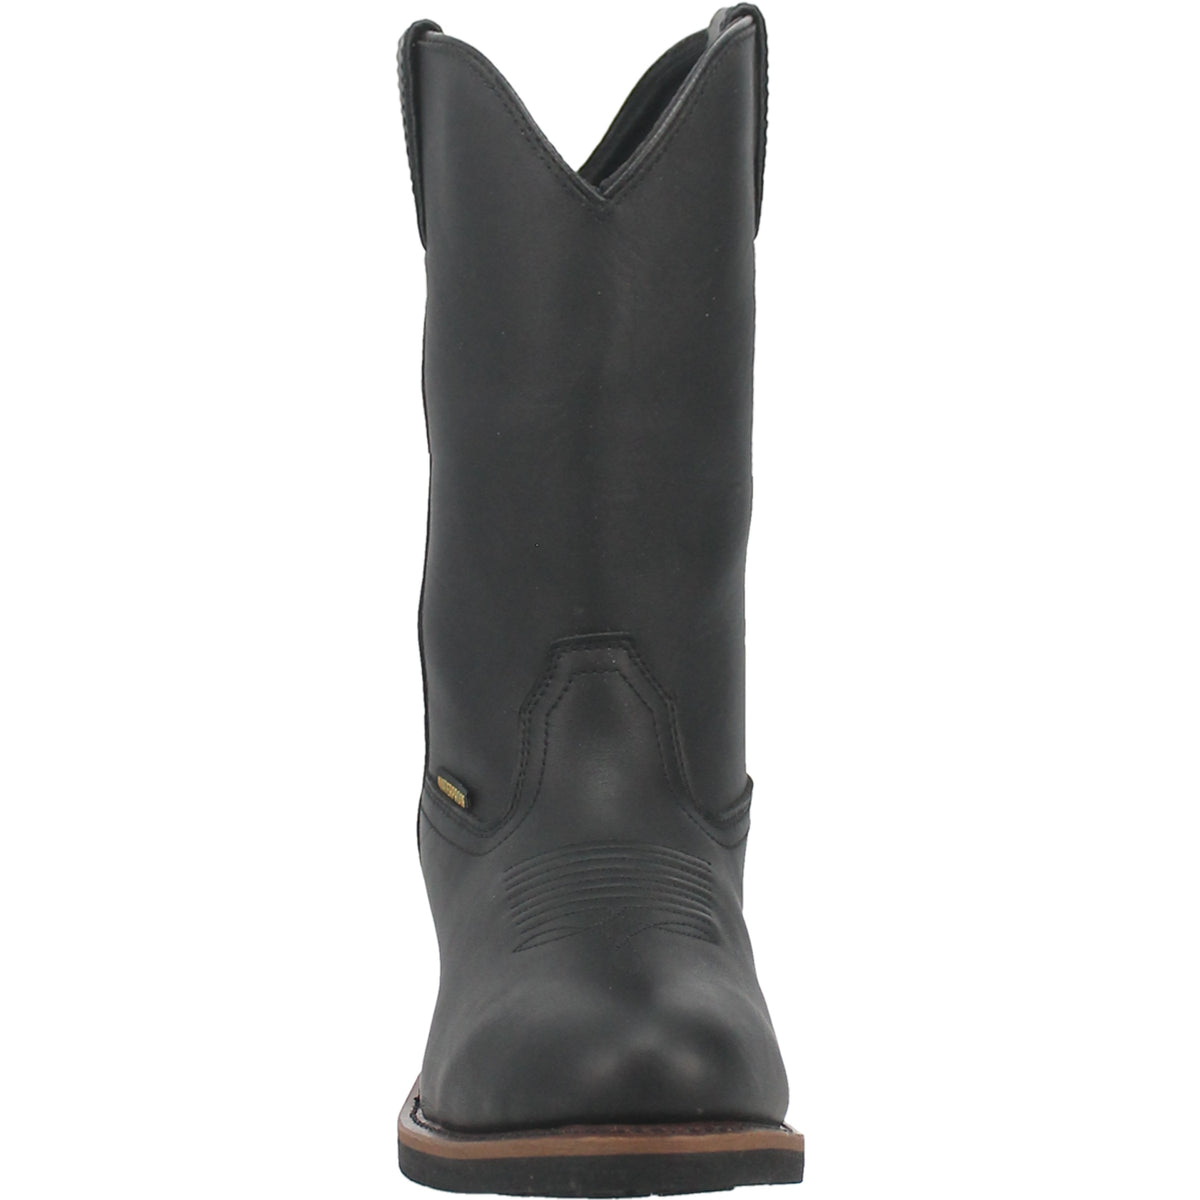 ALBUQUERQUE WATERPROOF LEATHER BOOT Cover